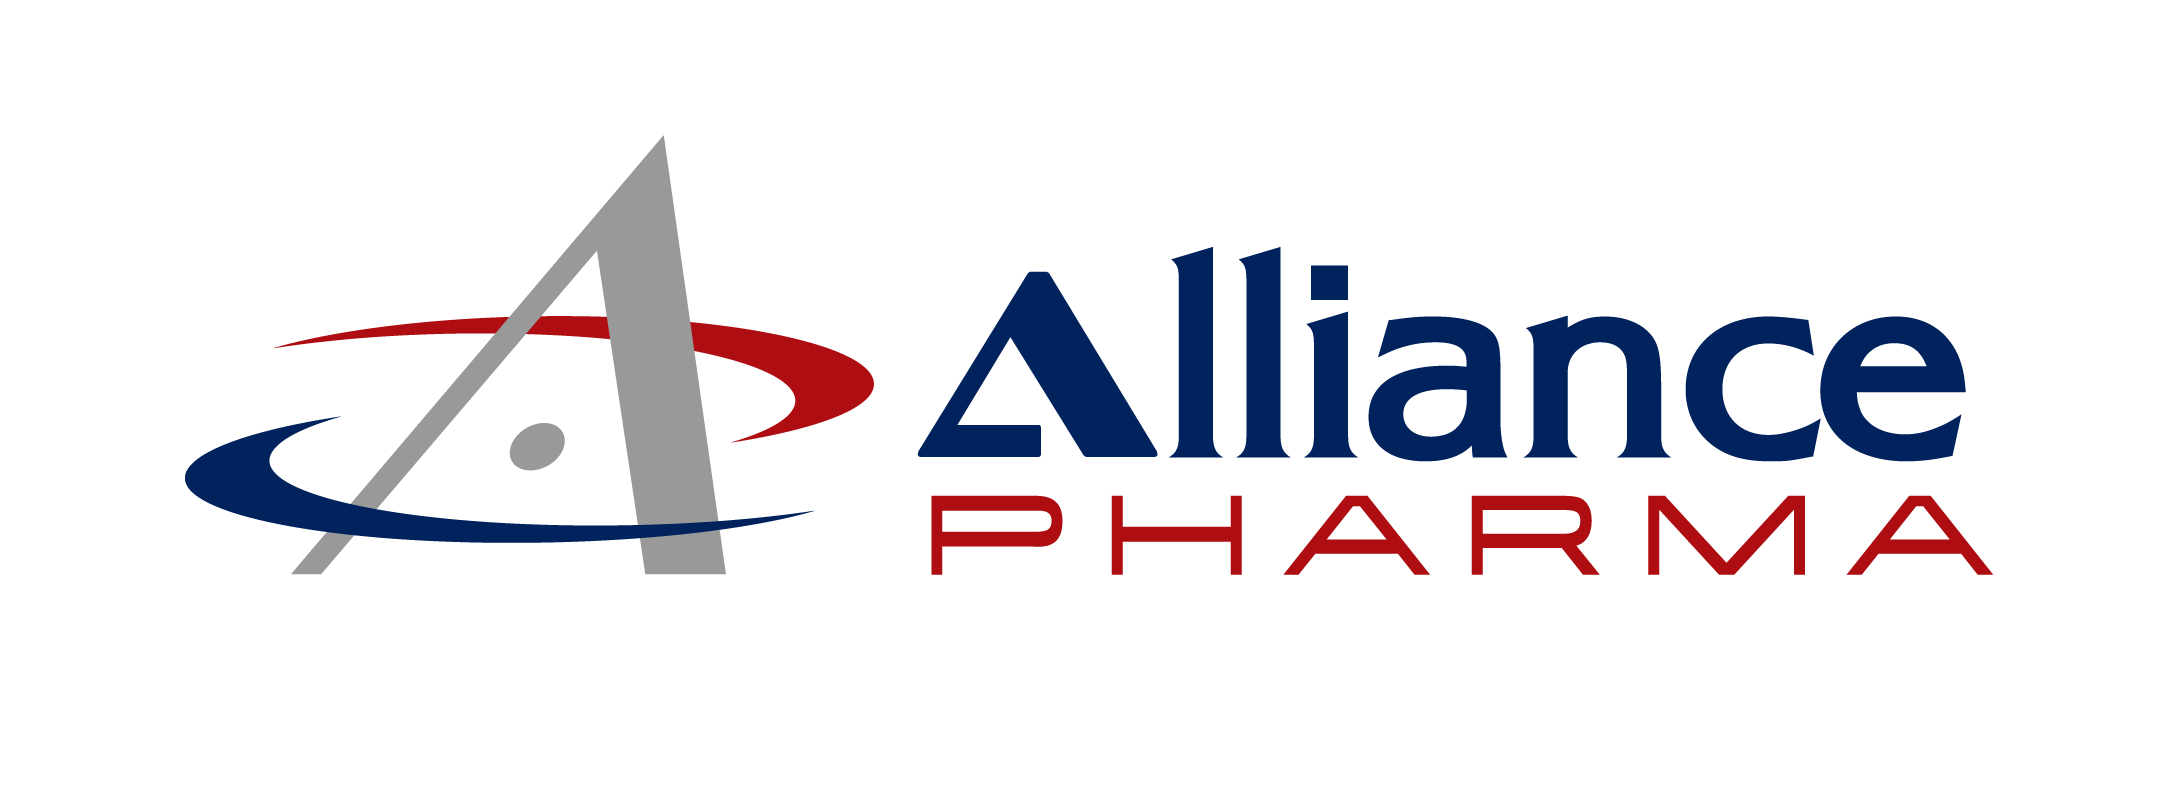 CRO Alliance Pharma’s Executive Team Grows by Four, Supporting Bioanalytical and CMC Testing Expansions